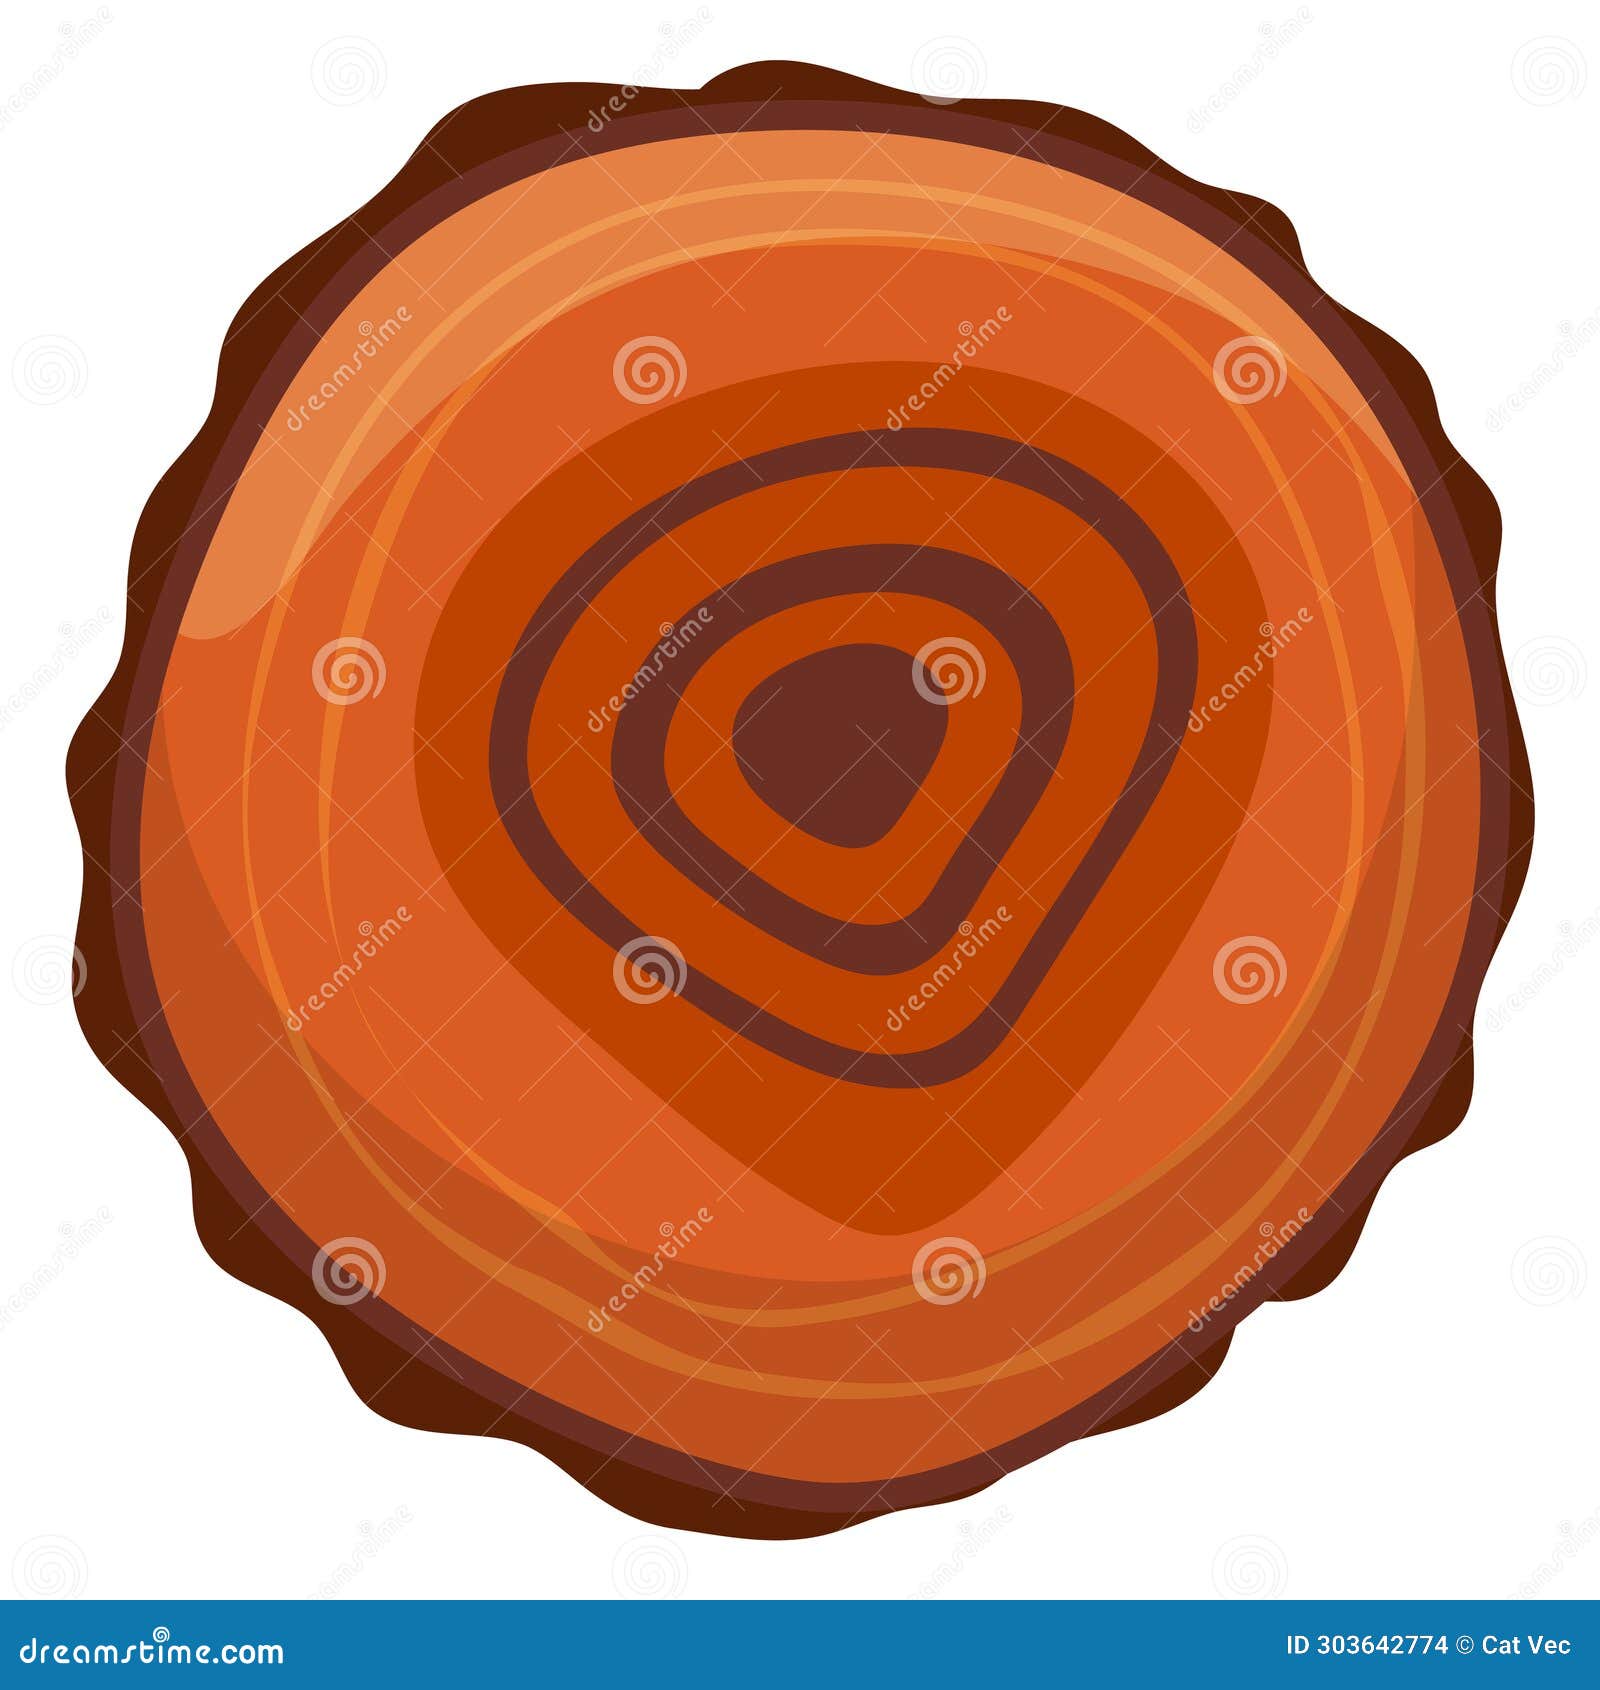 Annual Rings Of A Tree Disc That Show The Age Of A Tree. In This Case The  Tree Grate Of A Larch Stock Photo, Picture and Royalty Free Image. Image  164729556.